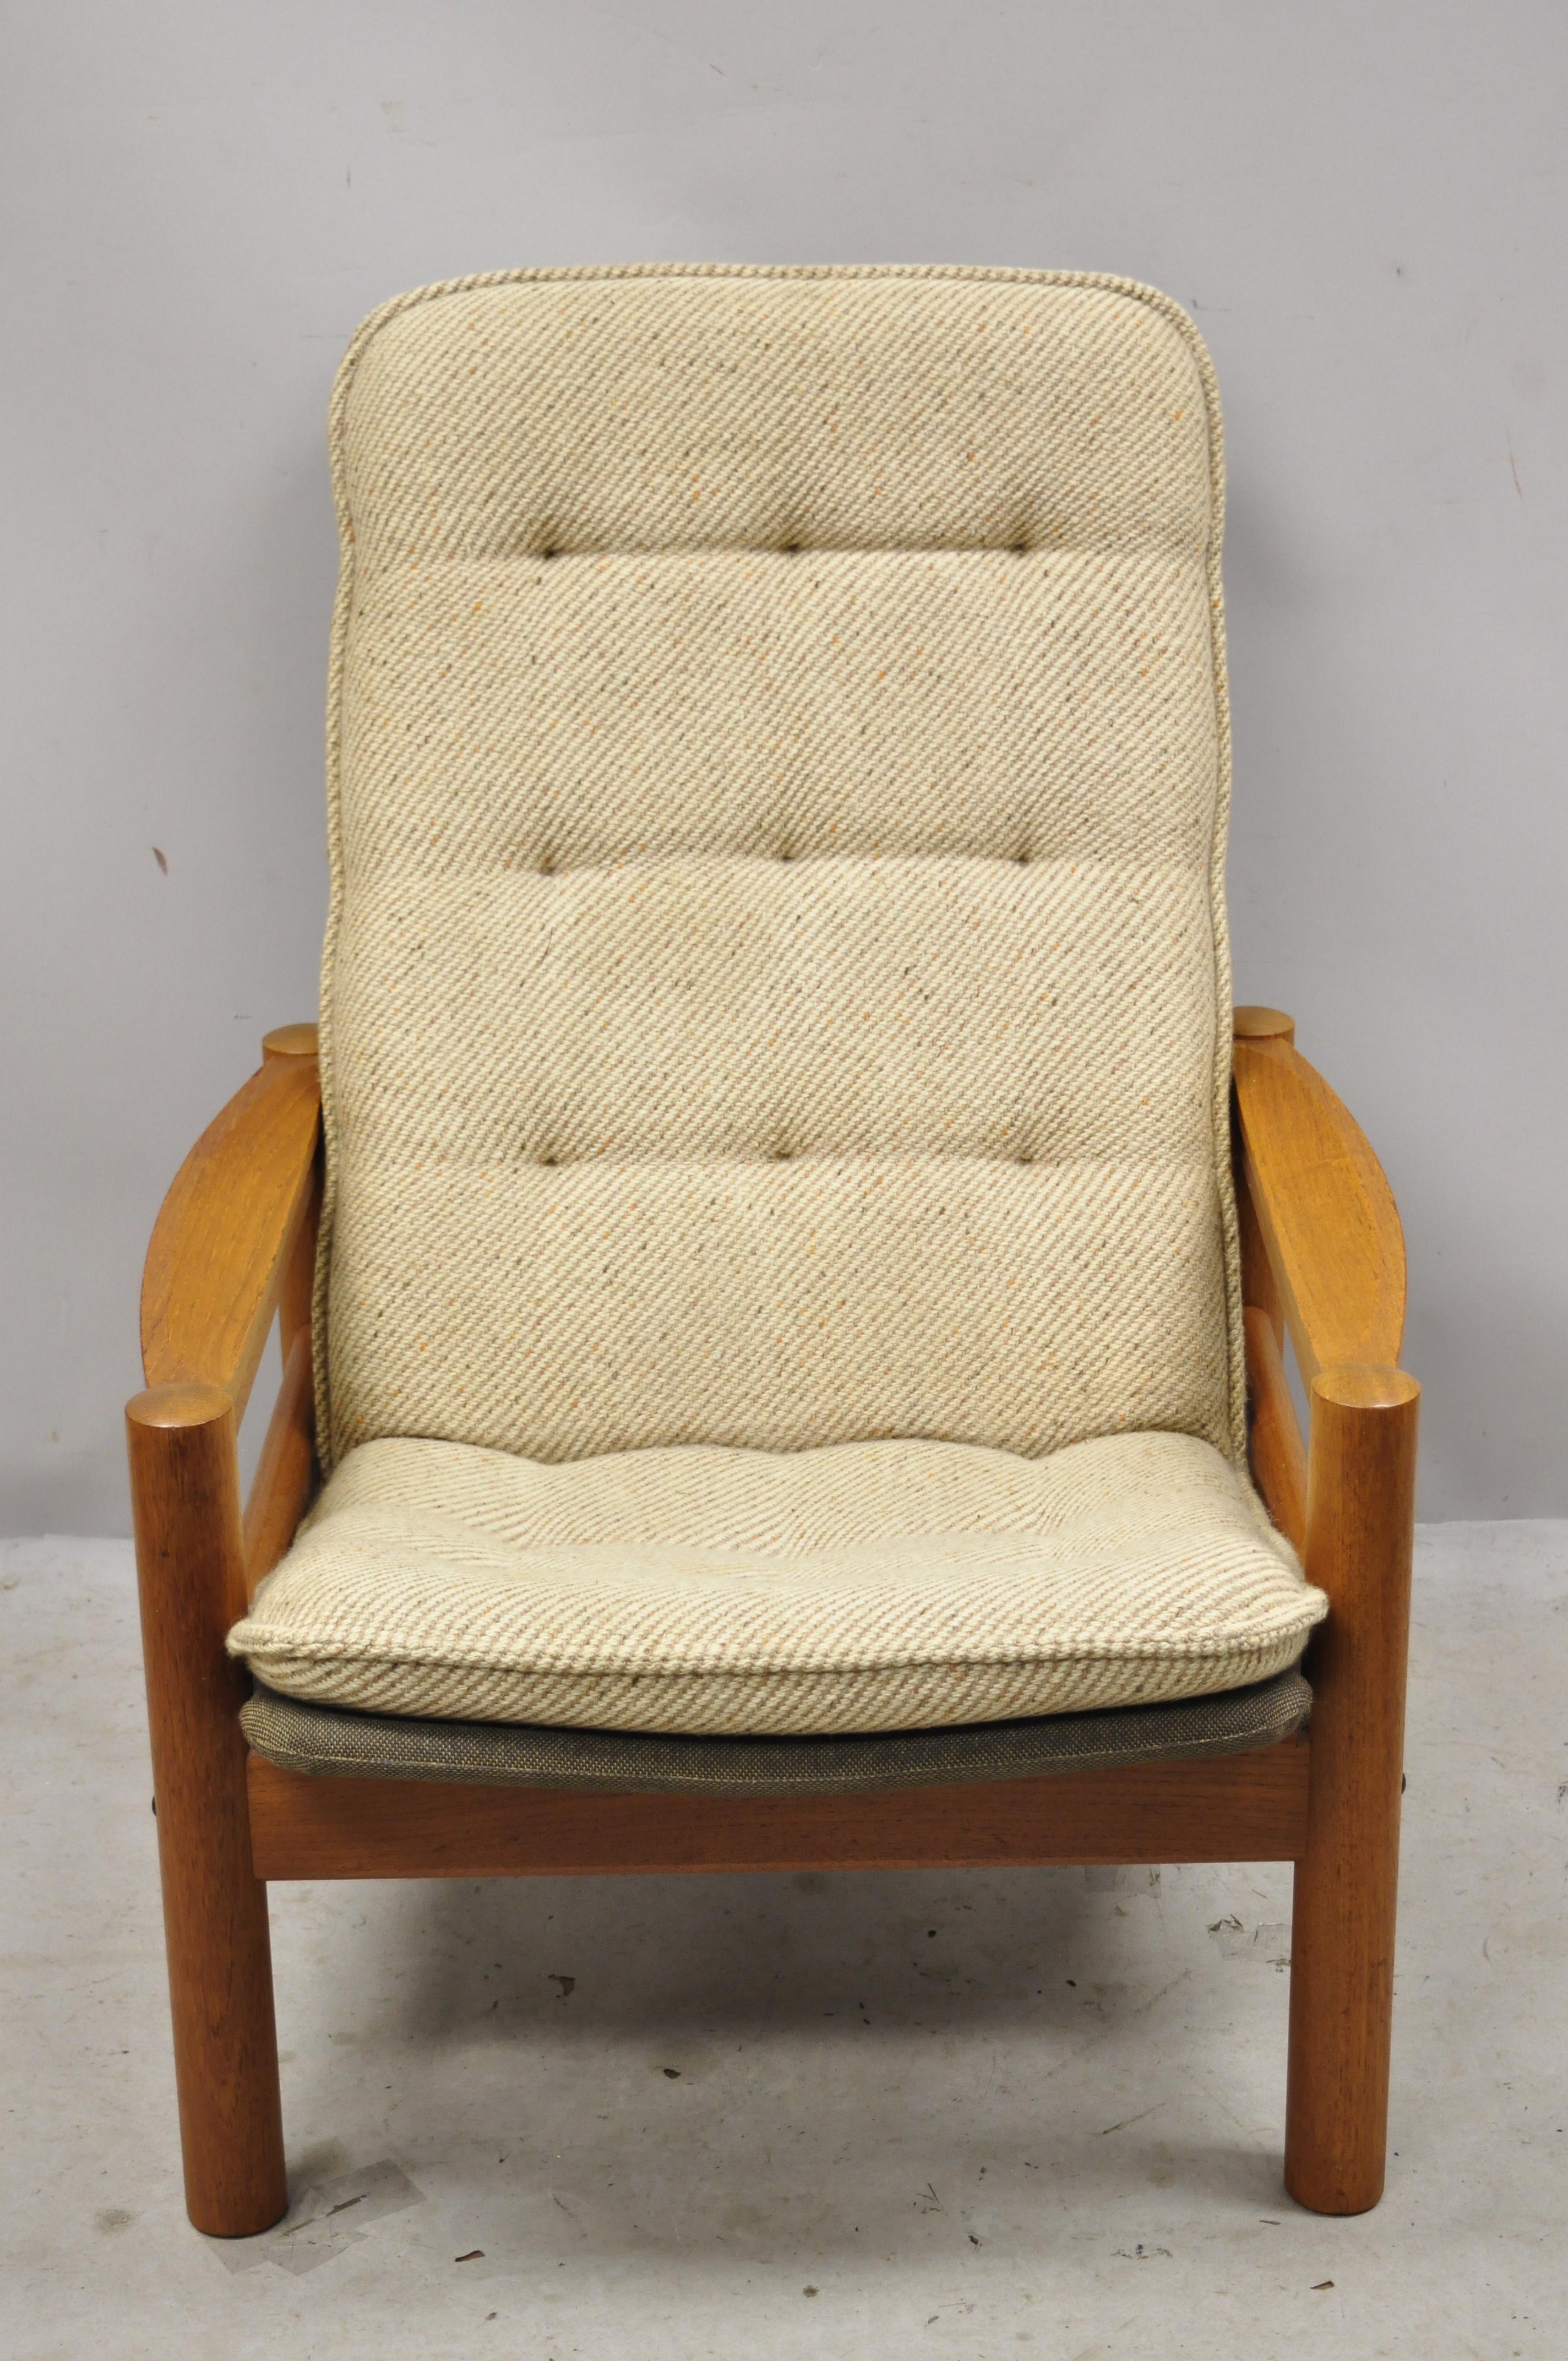 Domino Mobler mid century Danish modern teak wood upholstered lounge chair. Item features solid wood frame, beautiful wood grain, original label, clean modernist lines, quality Danish craftsmanship, great style and form. Circa Mid 20th Century.